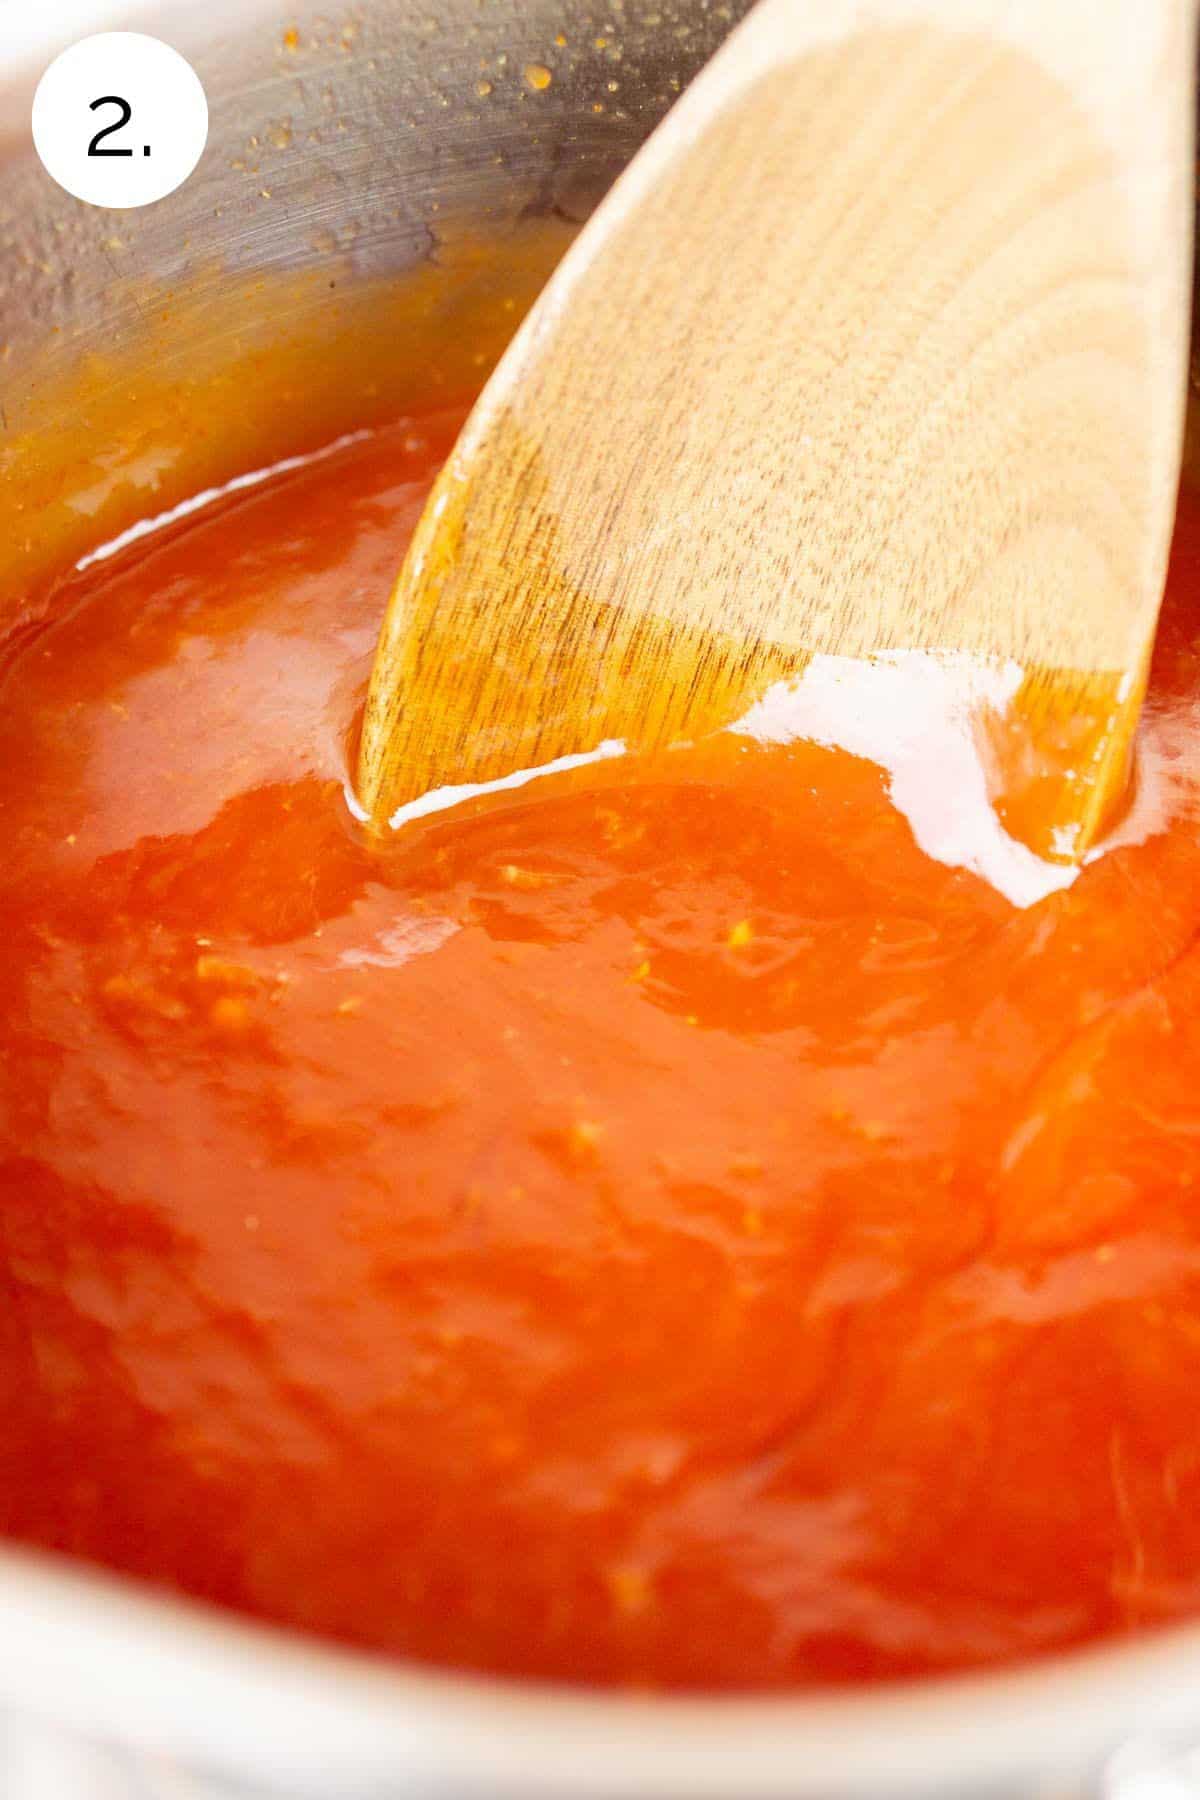 A wooden spoon stirring the sauce in a small stainless steel saucepan on the stove-top range to combine the ingredients.